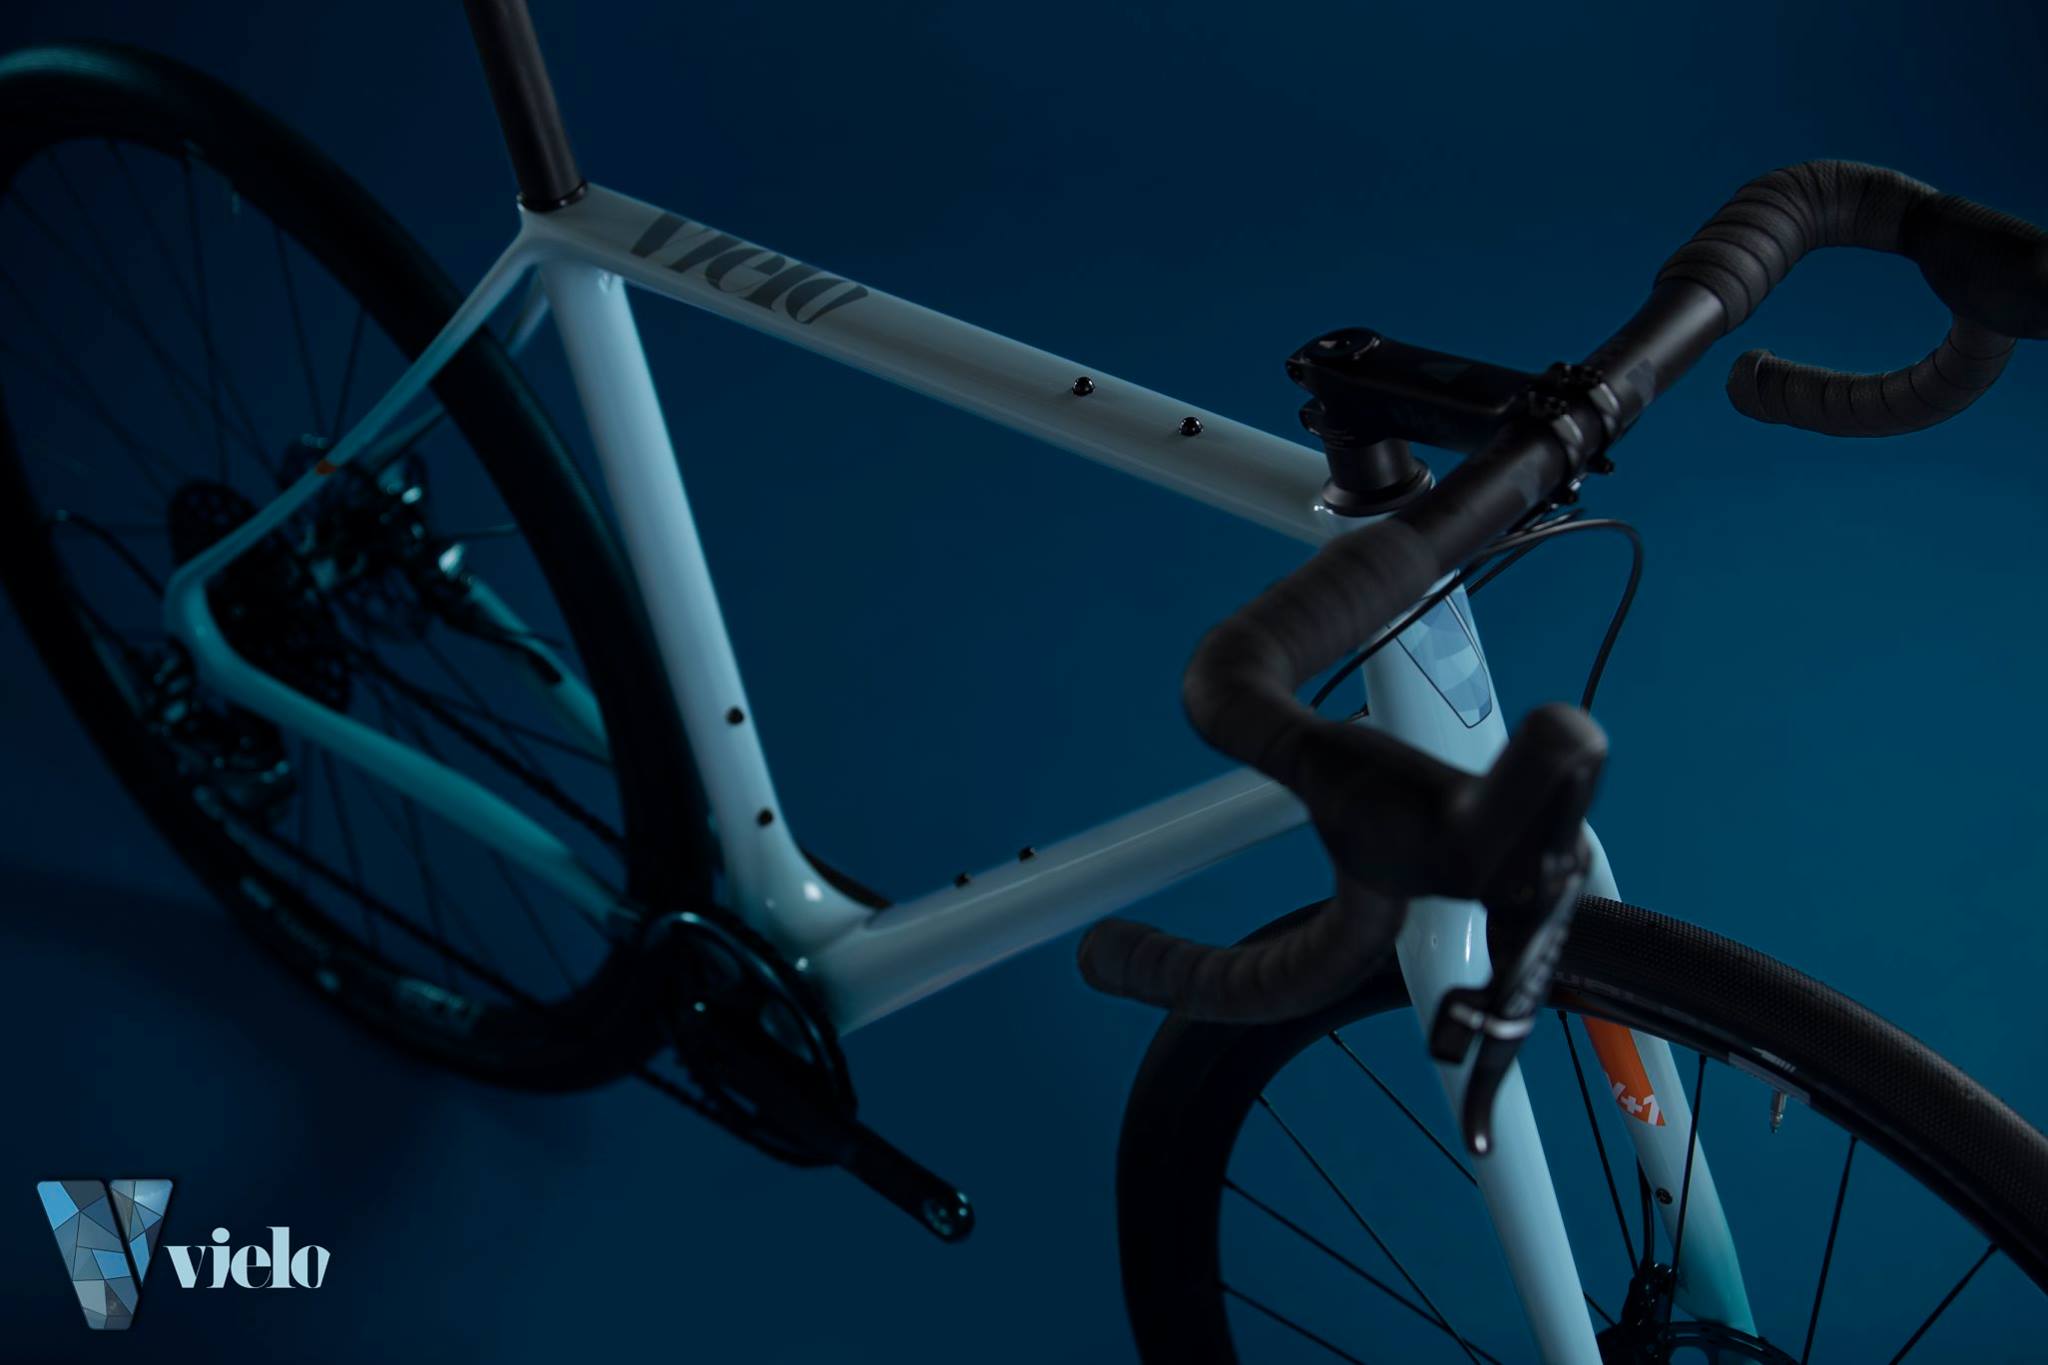 Vielo launches with V+1 all road bike tuned for riding on & off British roads